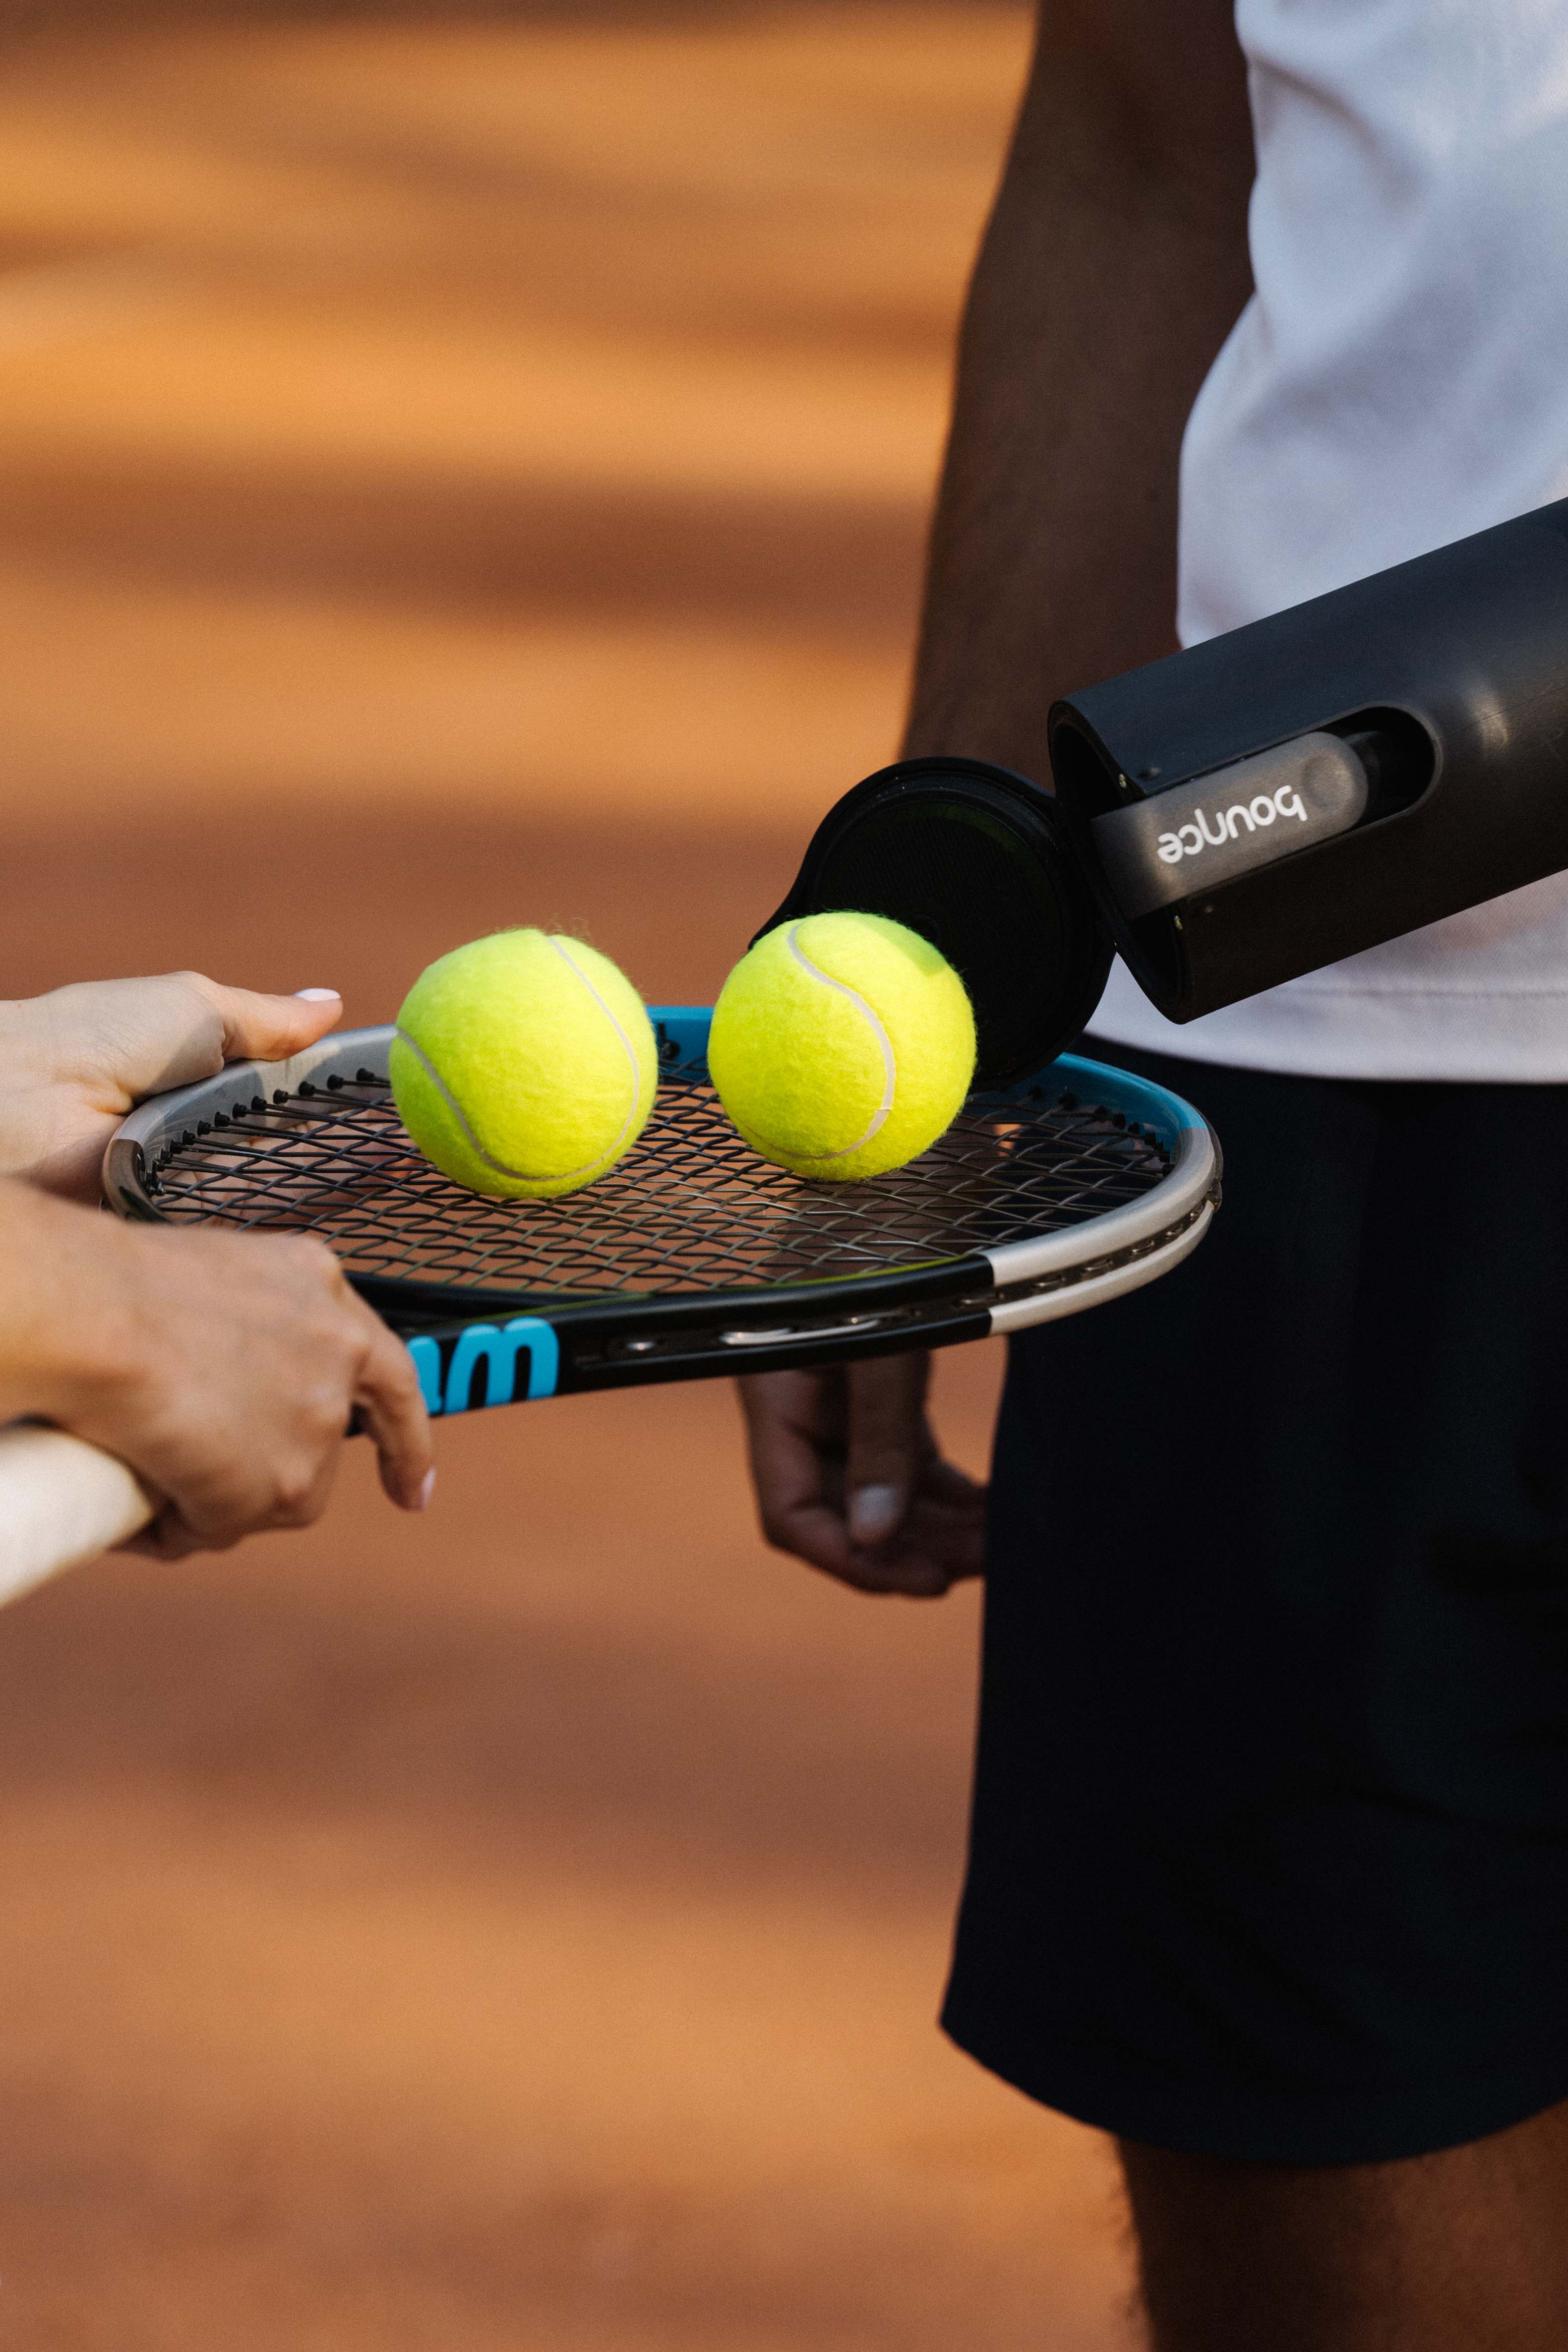 The next generation tubes for tennis players, the Bounce tube